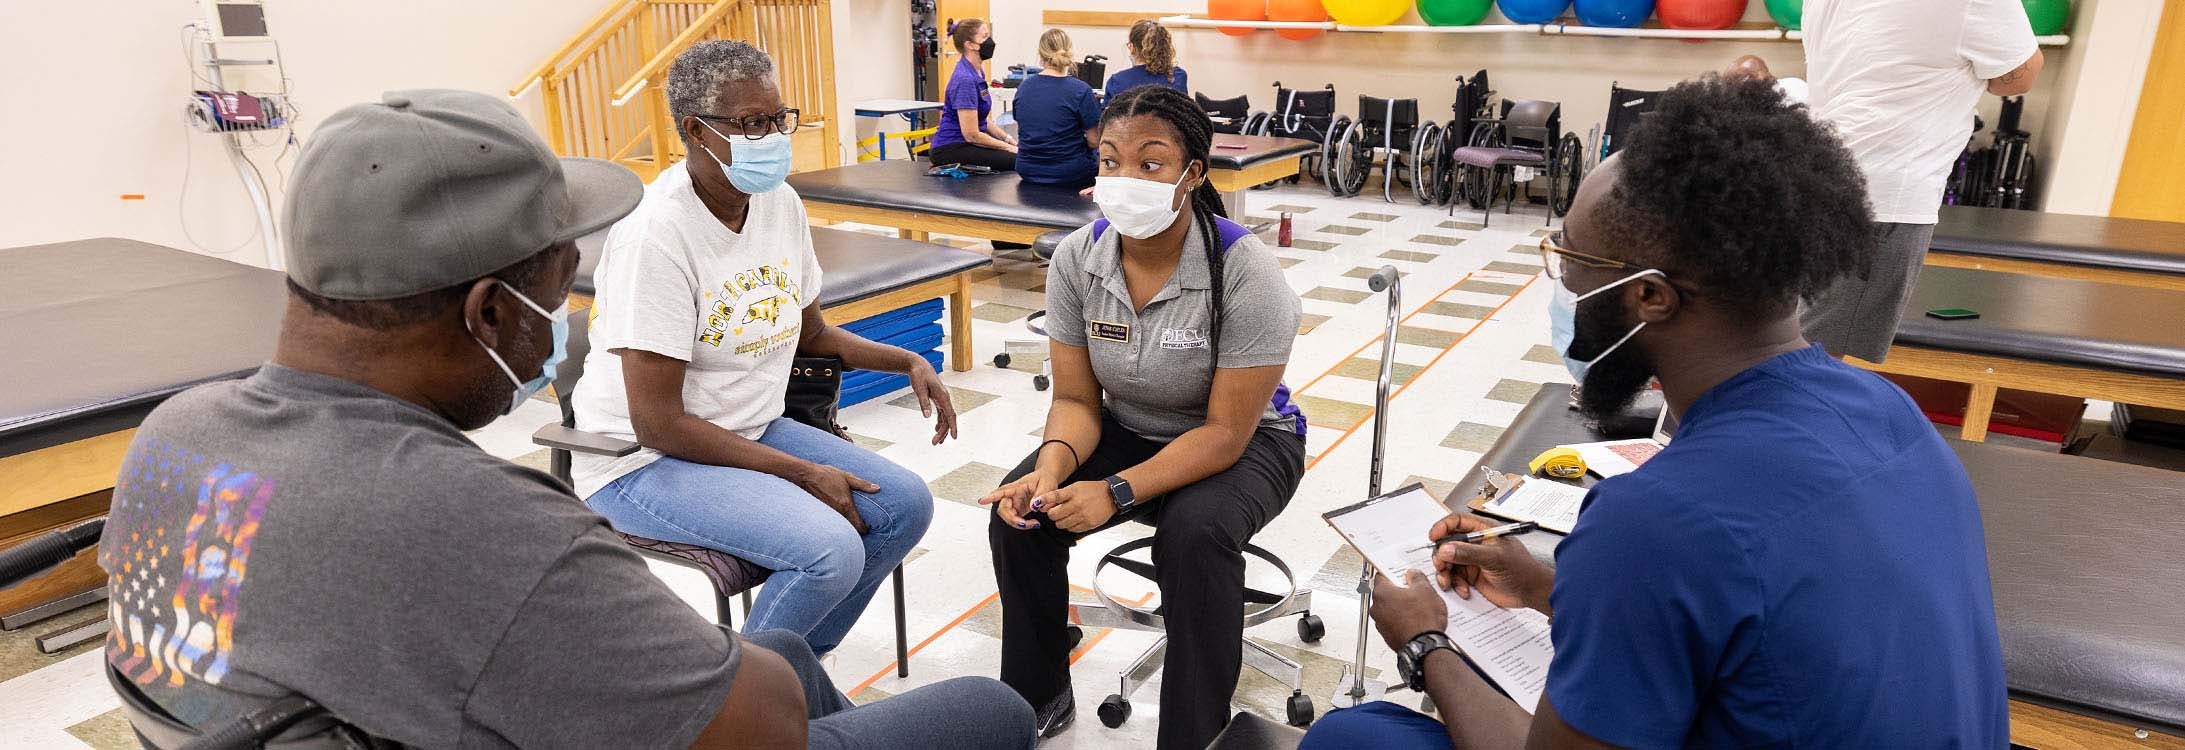 Physical Therapy student Junae Staples, and occupational therapy student Ayoola Ajani, in blue scrubs, work with a family during a student-run clinic for eastern North Carolina patients.